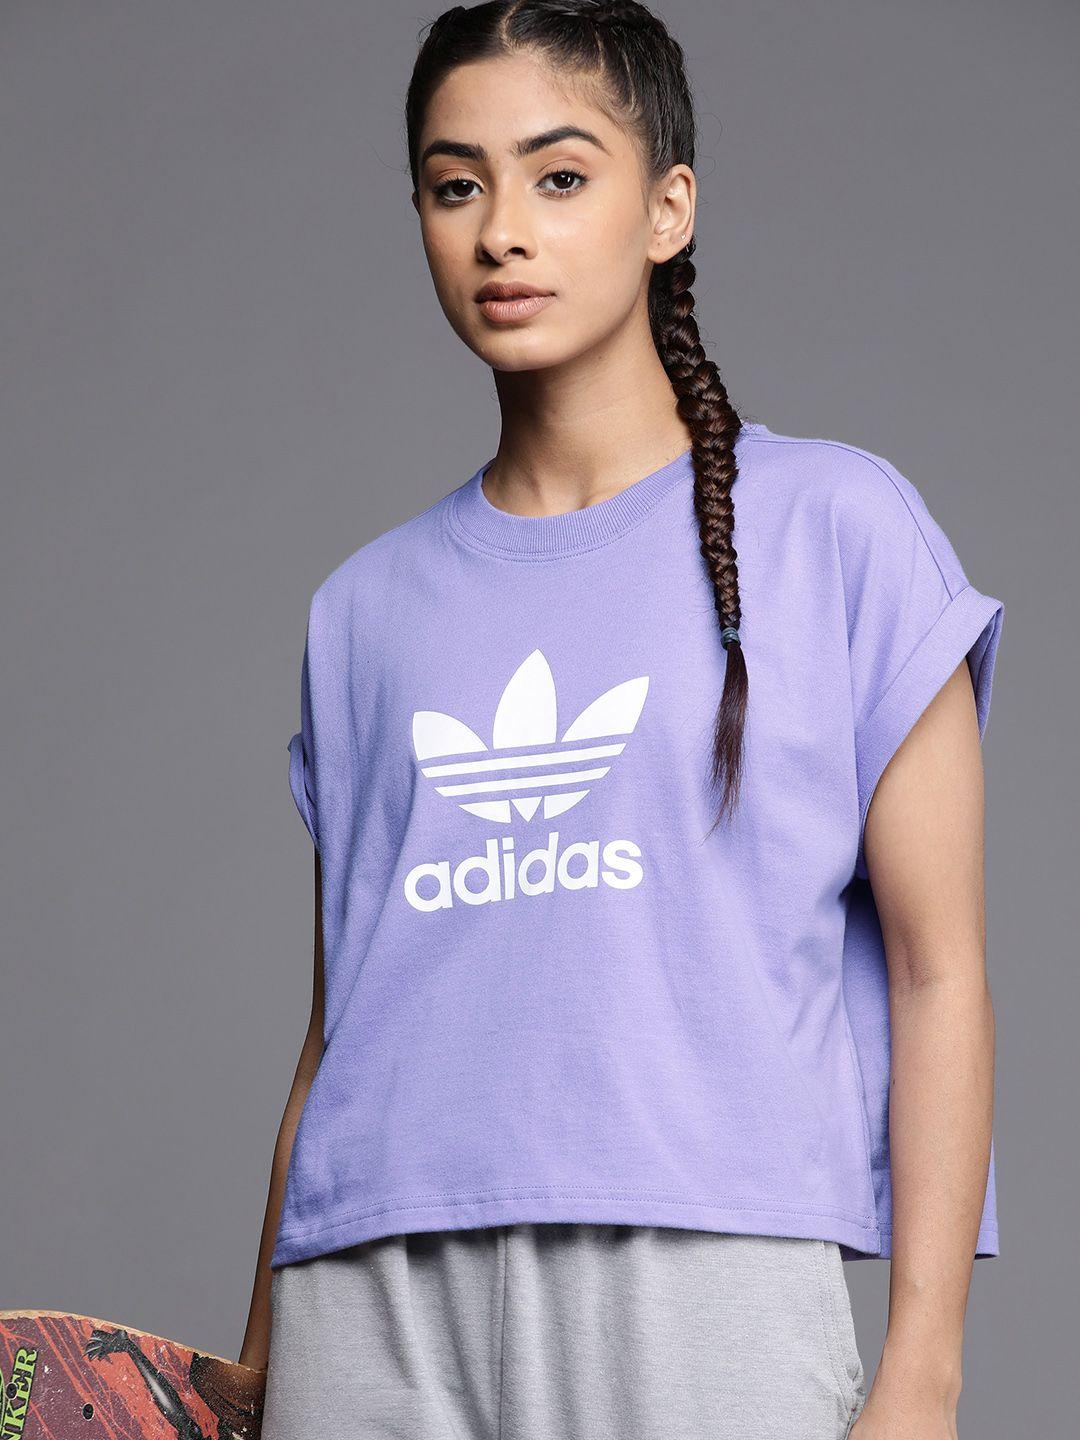 adidas originals women brand logo printed extended sleeves cropped t-shirt